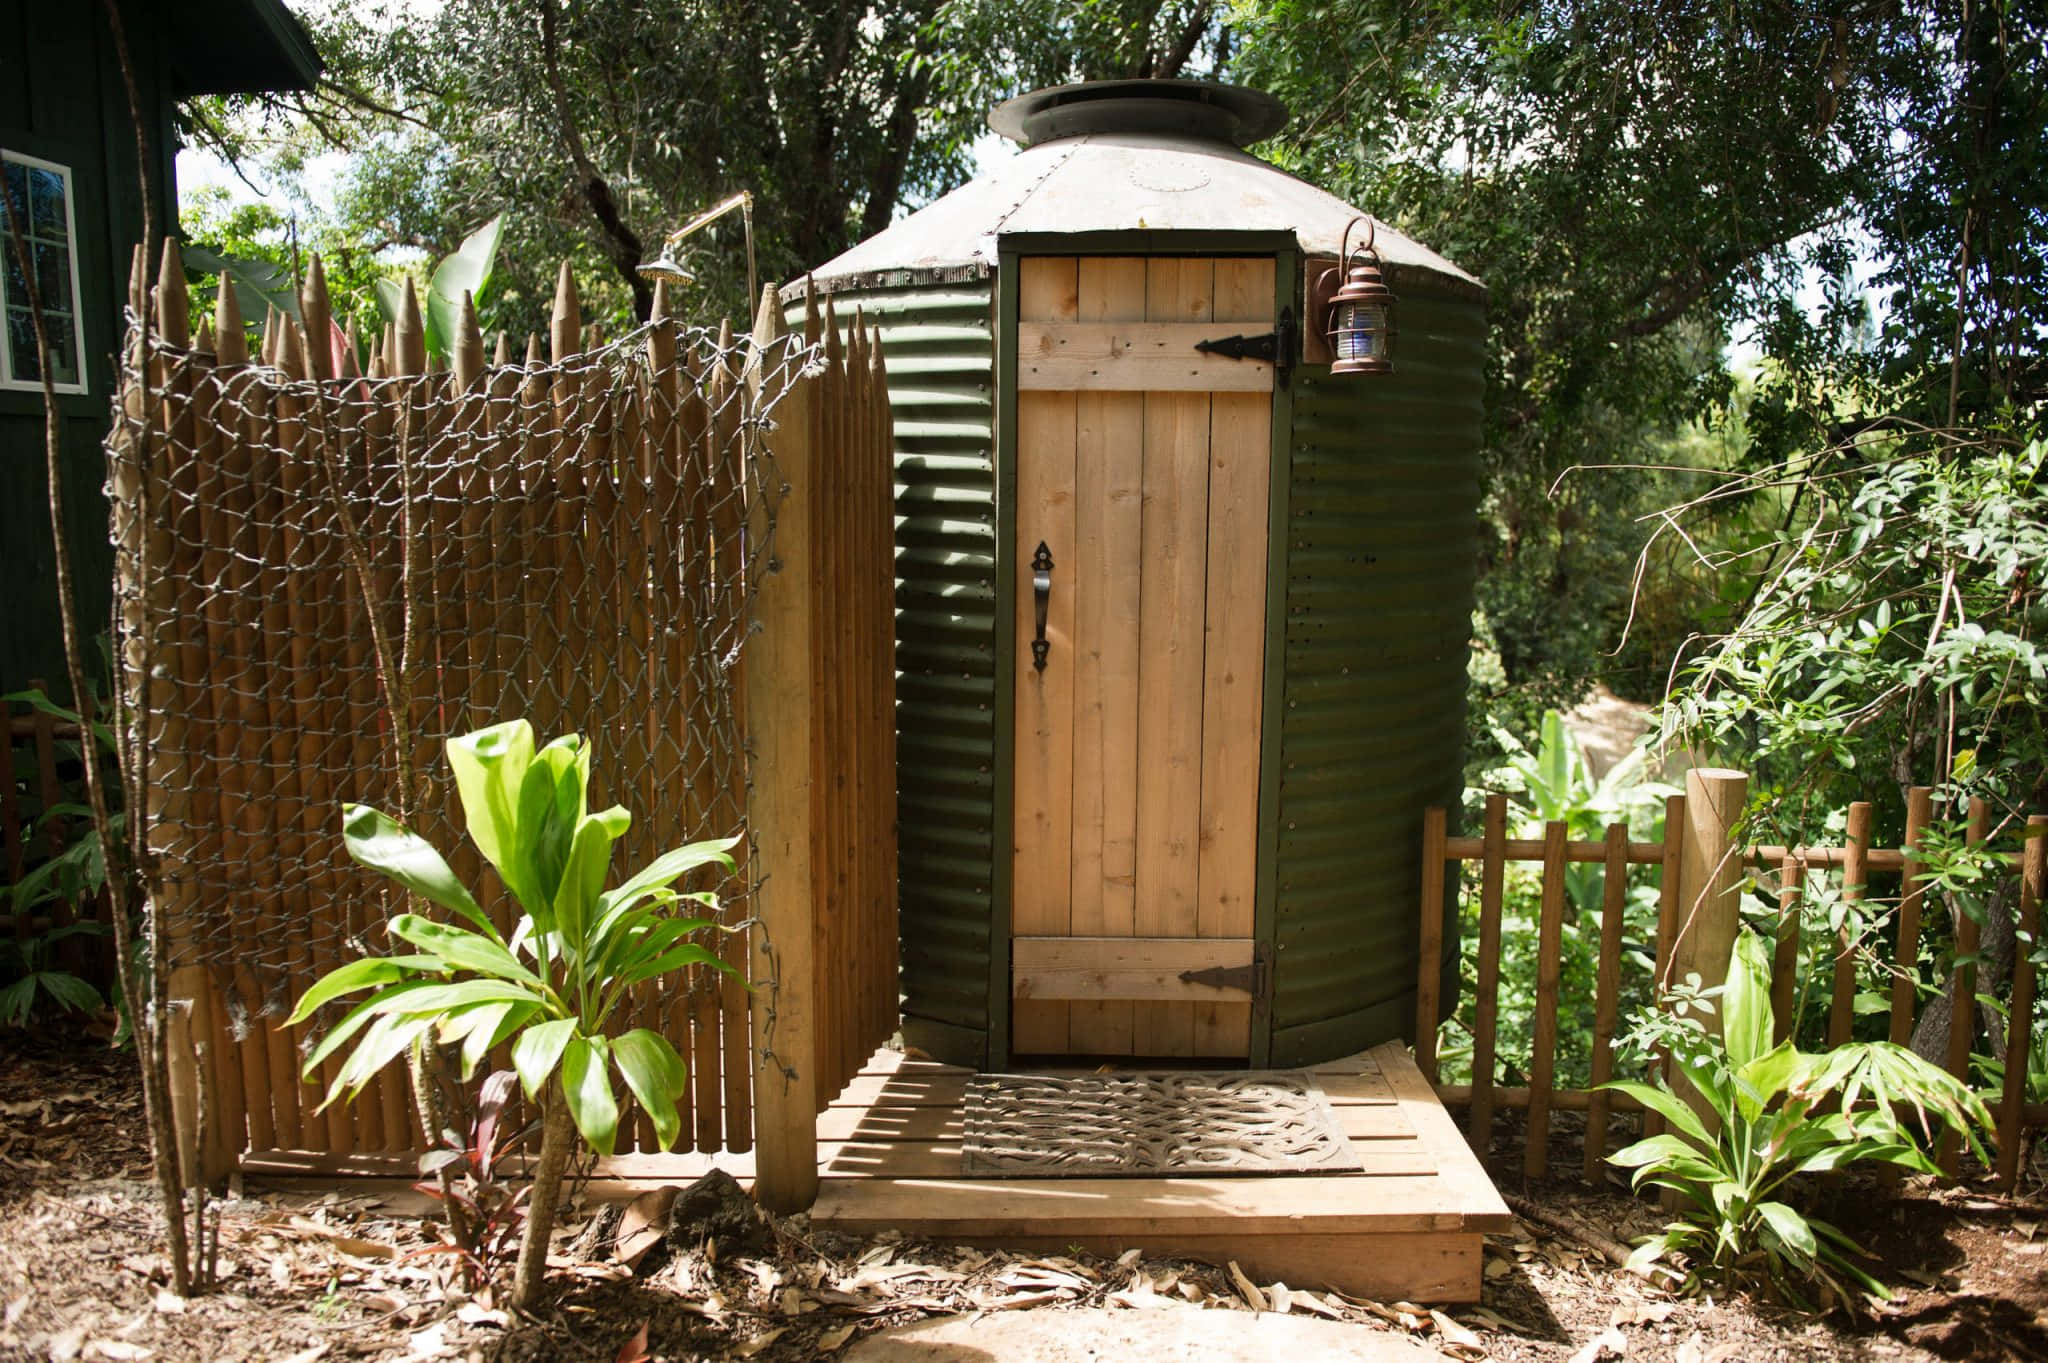 Take a Break from Everyday Life and Visit an Outhouse